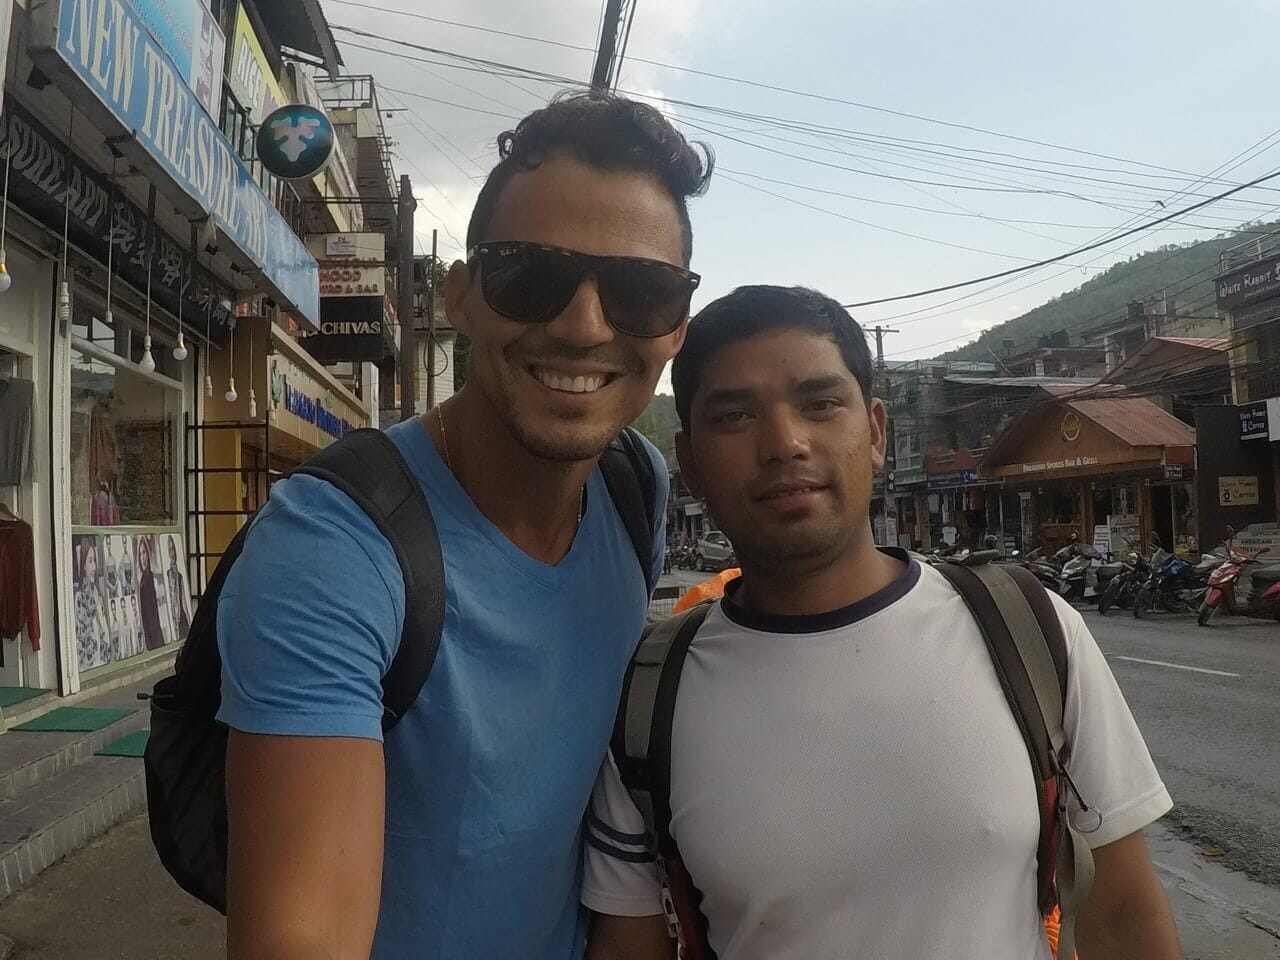 Pericles rosa wearing a blue t-shirt and sunglasses with a local guide on a street in Pokhara, Nepal